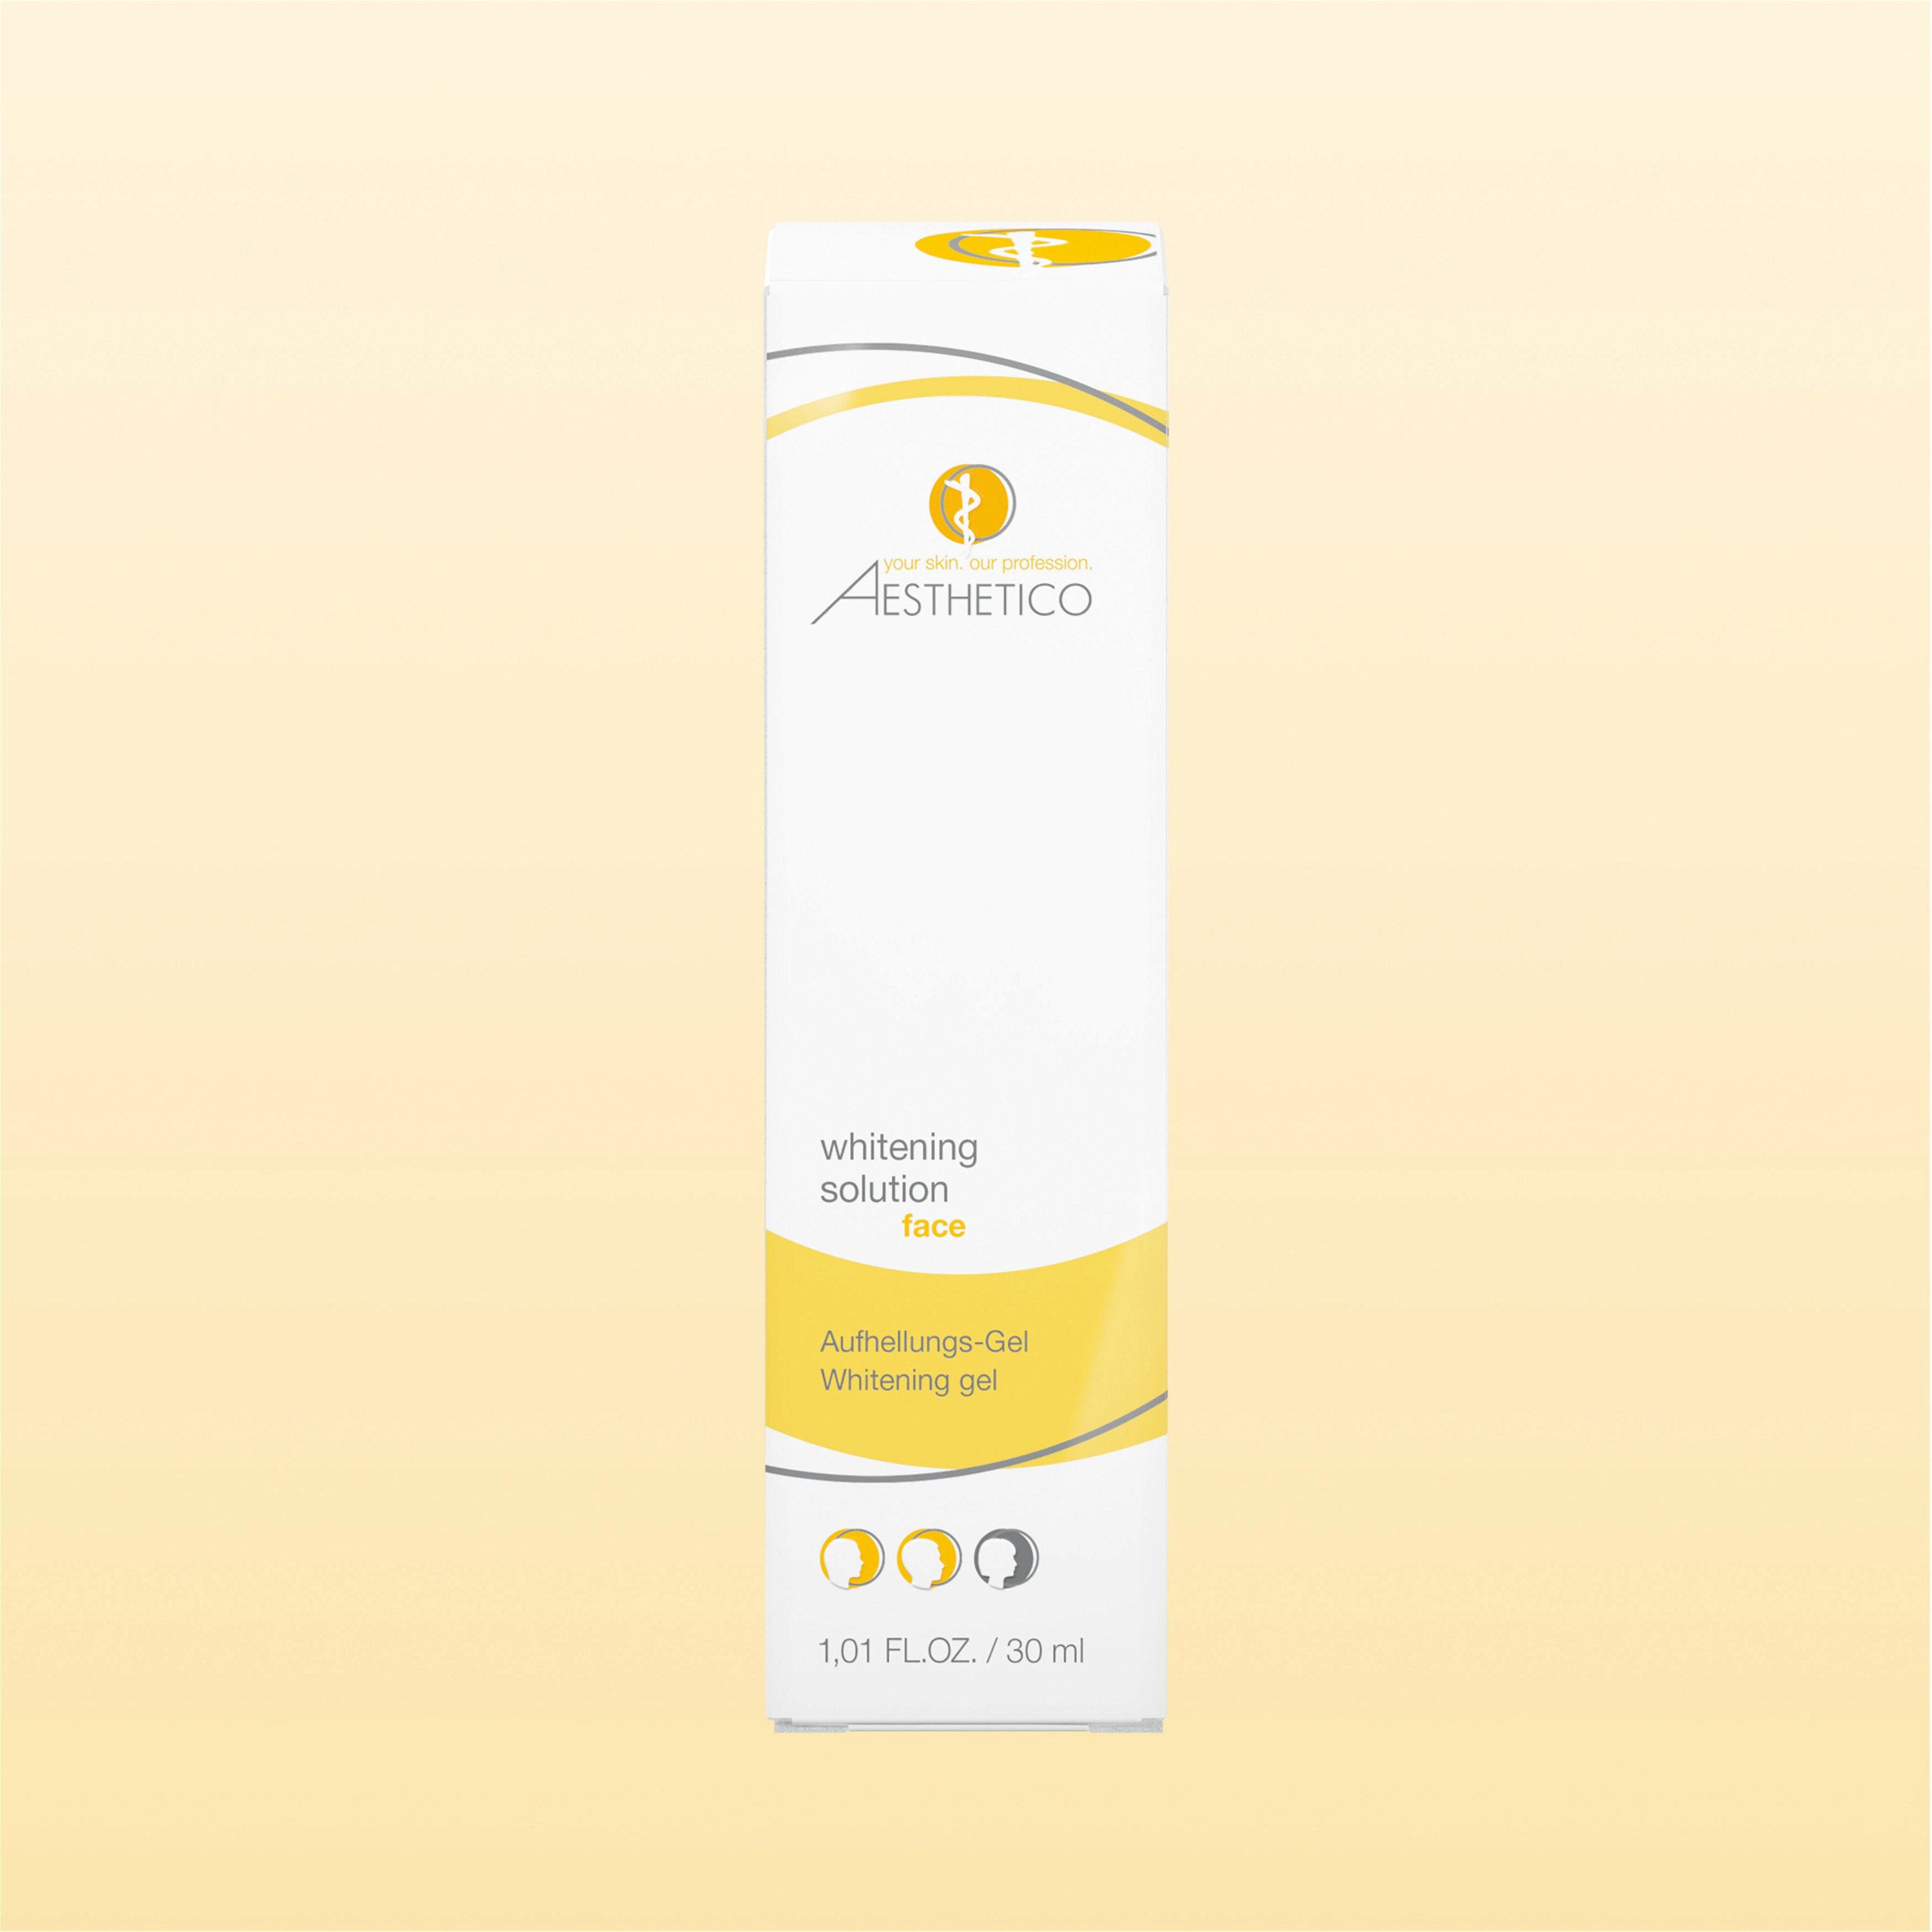 Umverpackung AESTHETICO whitening solution, 30 ml